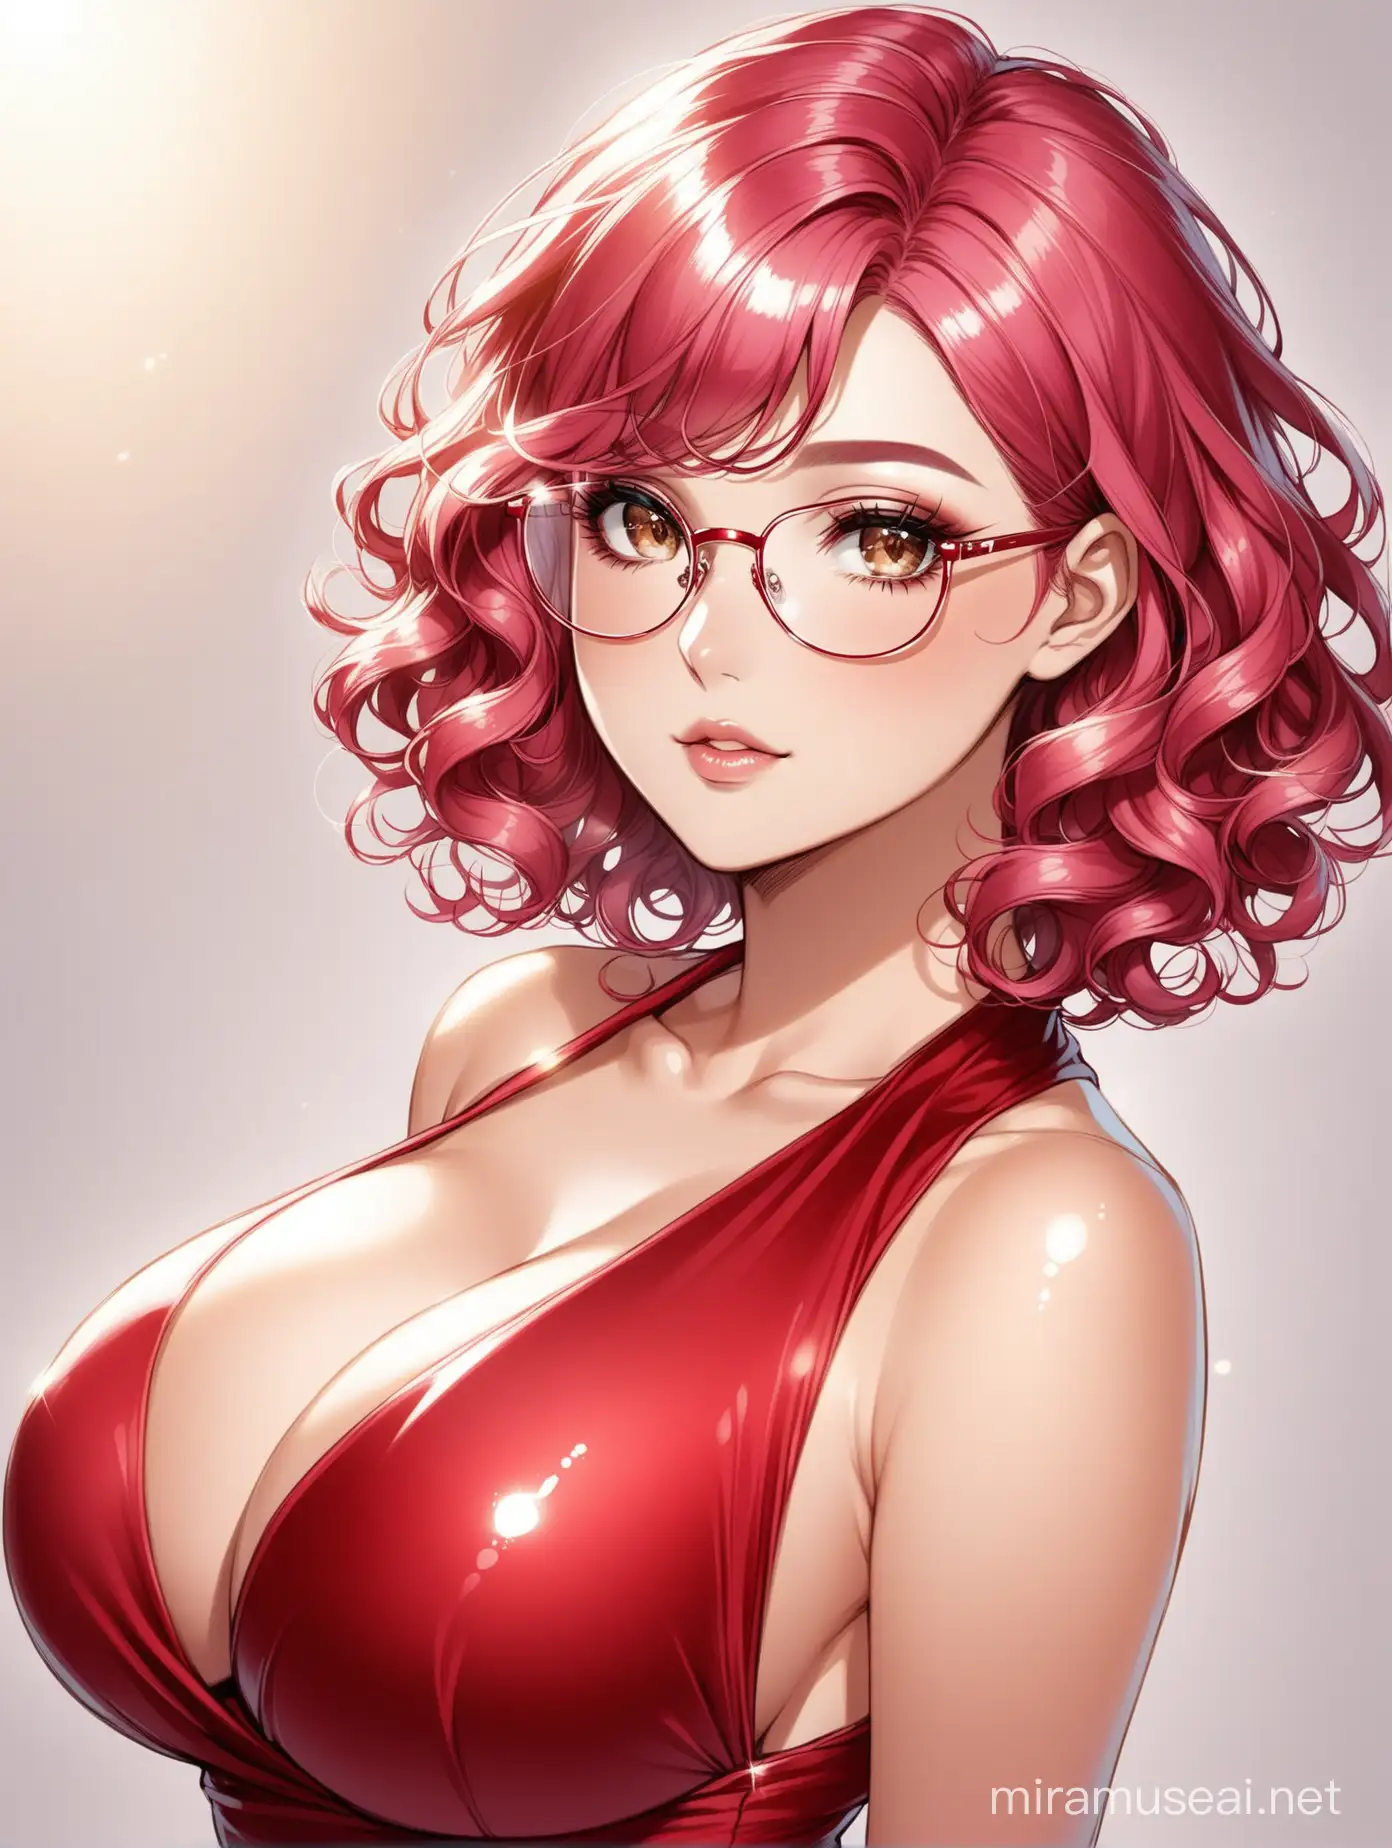 Short curly pink hair,glasses,brown eyes,gorgeous,wearing makeup,big breast,shiny red dress